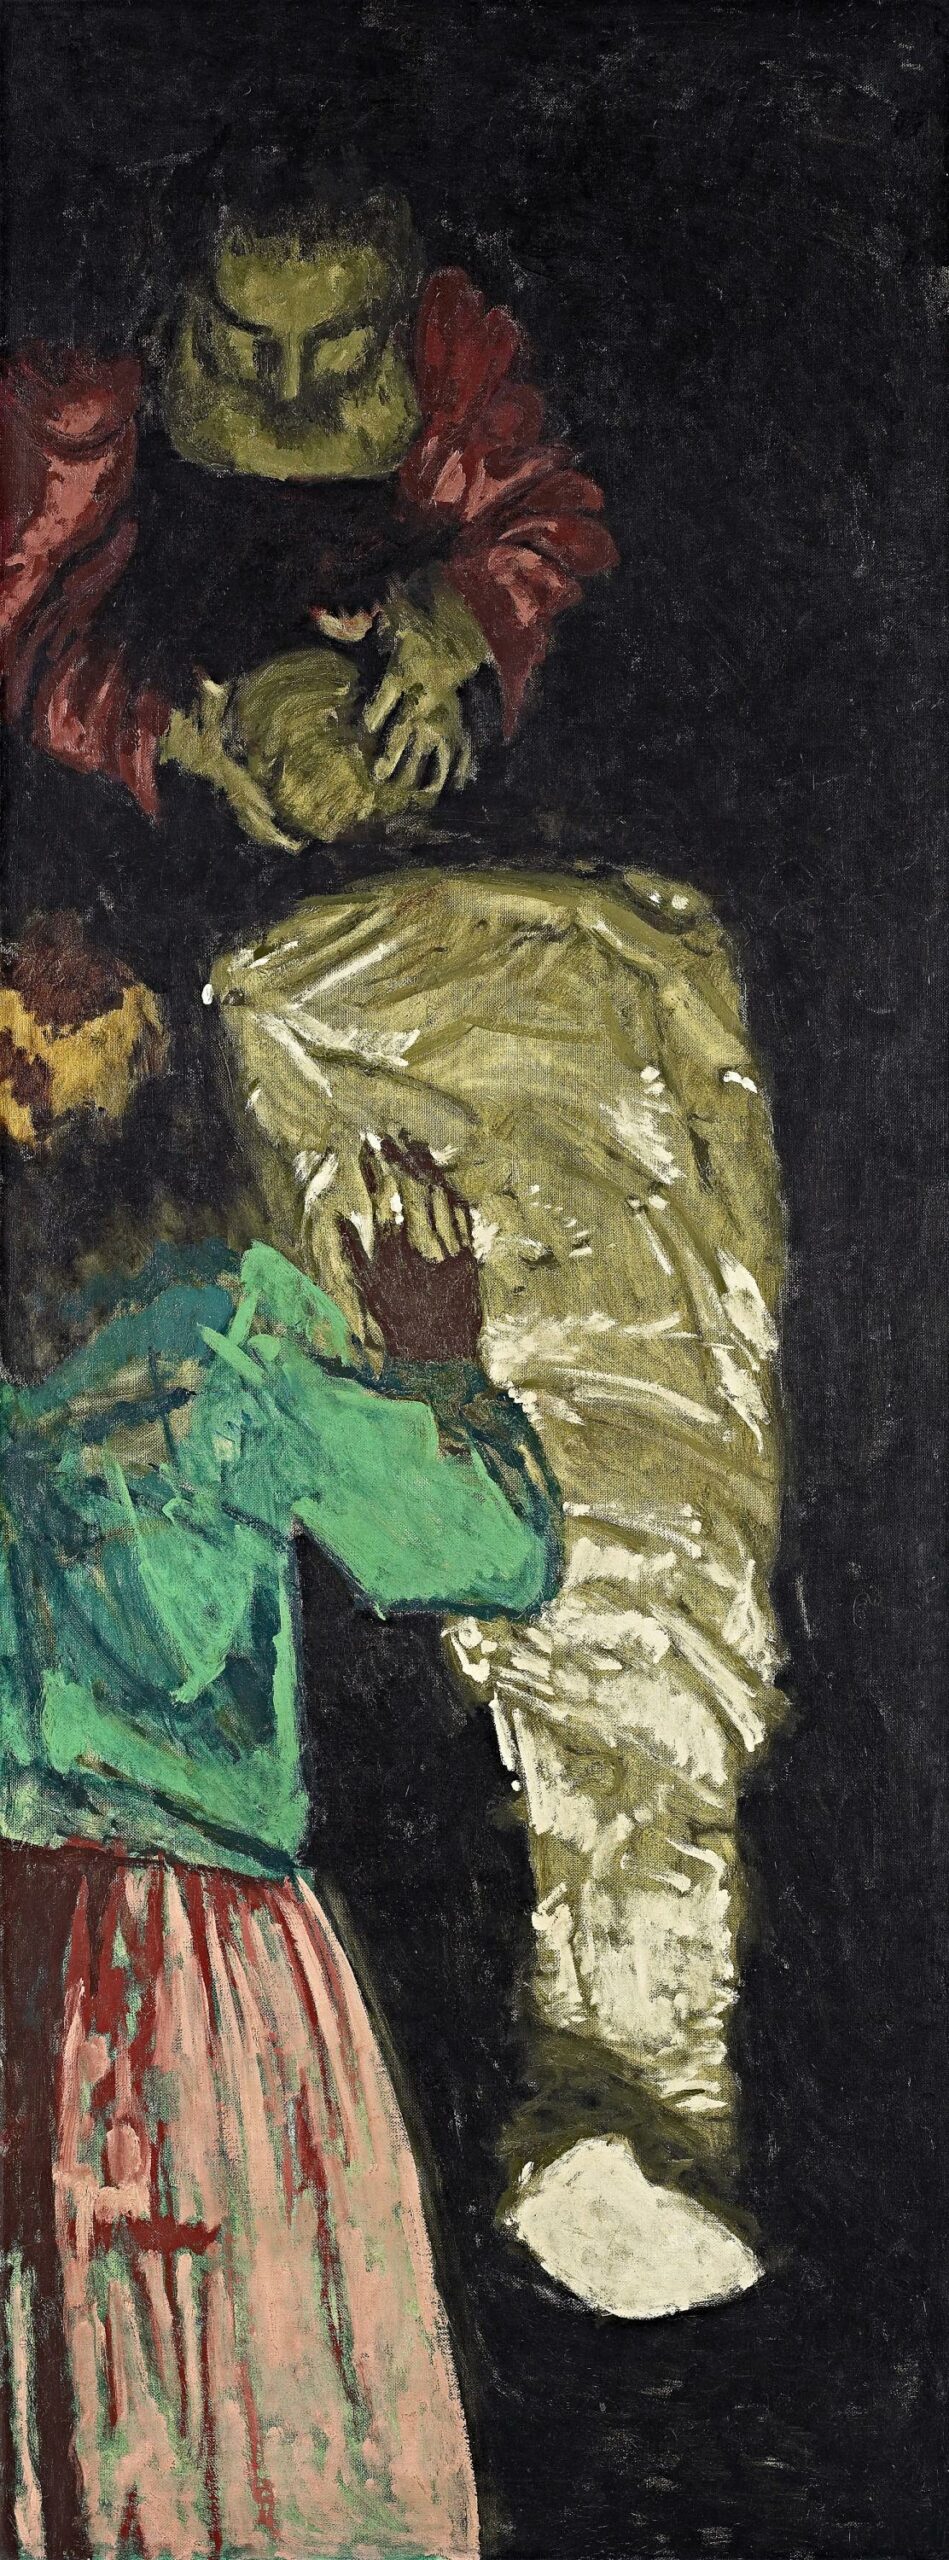 Walter Sickert, The raising of Lazarus (1928-1929), huile sur toile, National Gallery of Victoria, Melbourne Felton Bequest, 1947 This digital record has been made available on NGV Collection Online through the generous support of Digitisation Champion Ms Carol Grigor through Metal Manufactures Limited